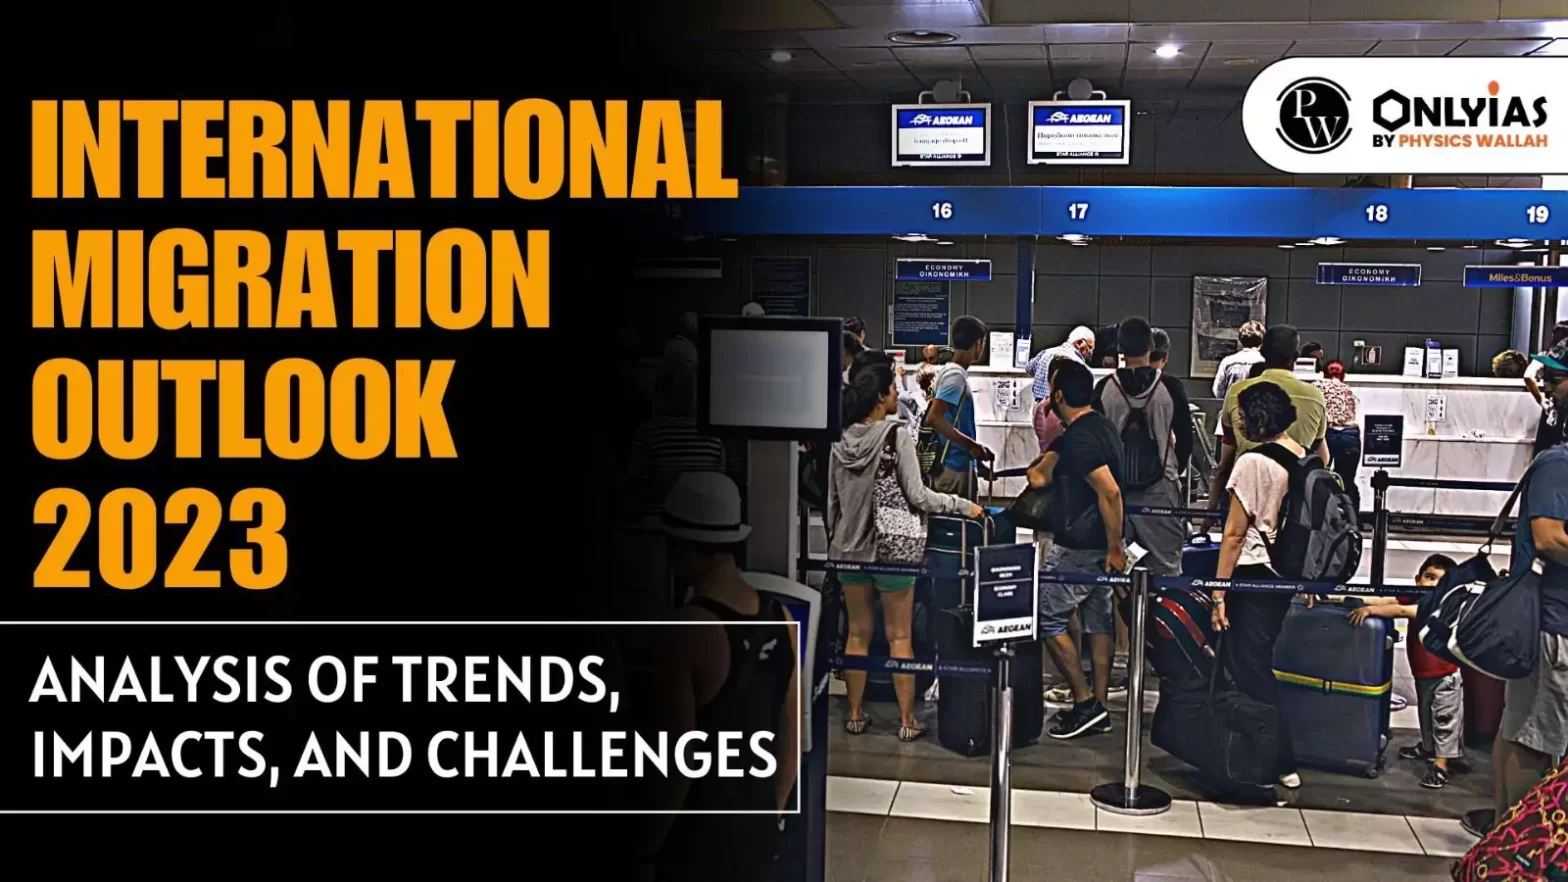 International Migration Outlook 2023: Analysis of Trends, Impacts, and Challenges